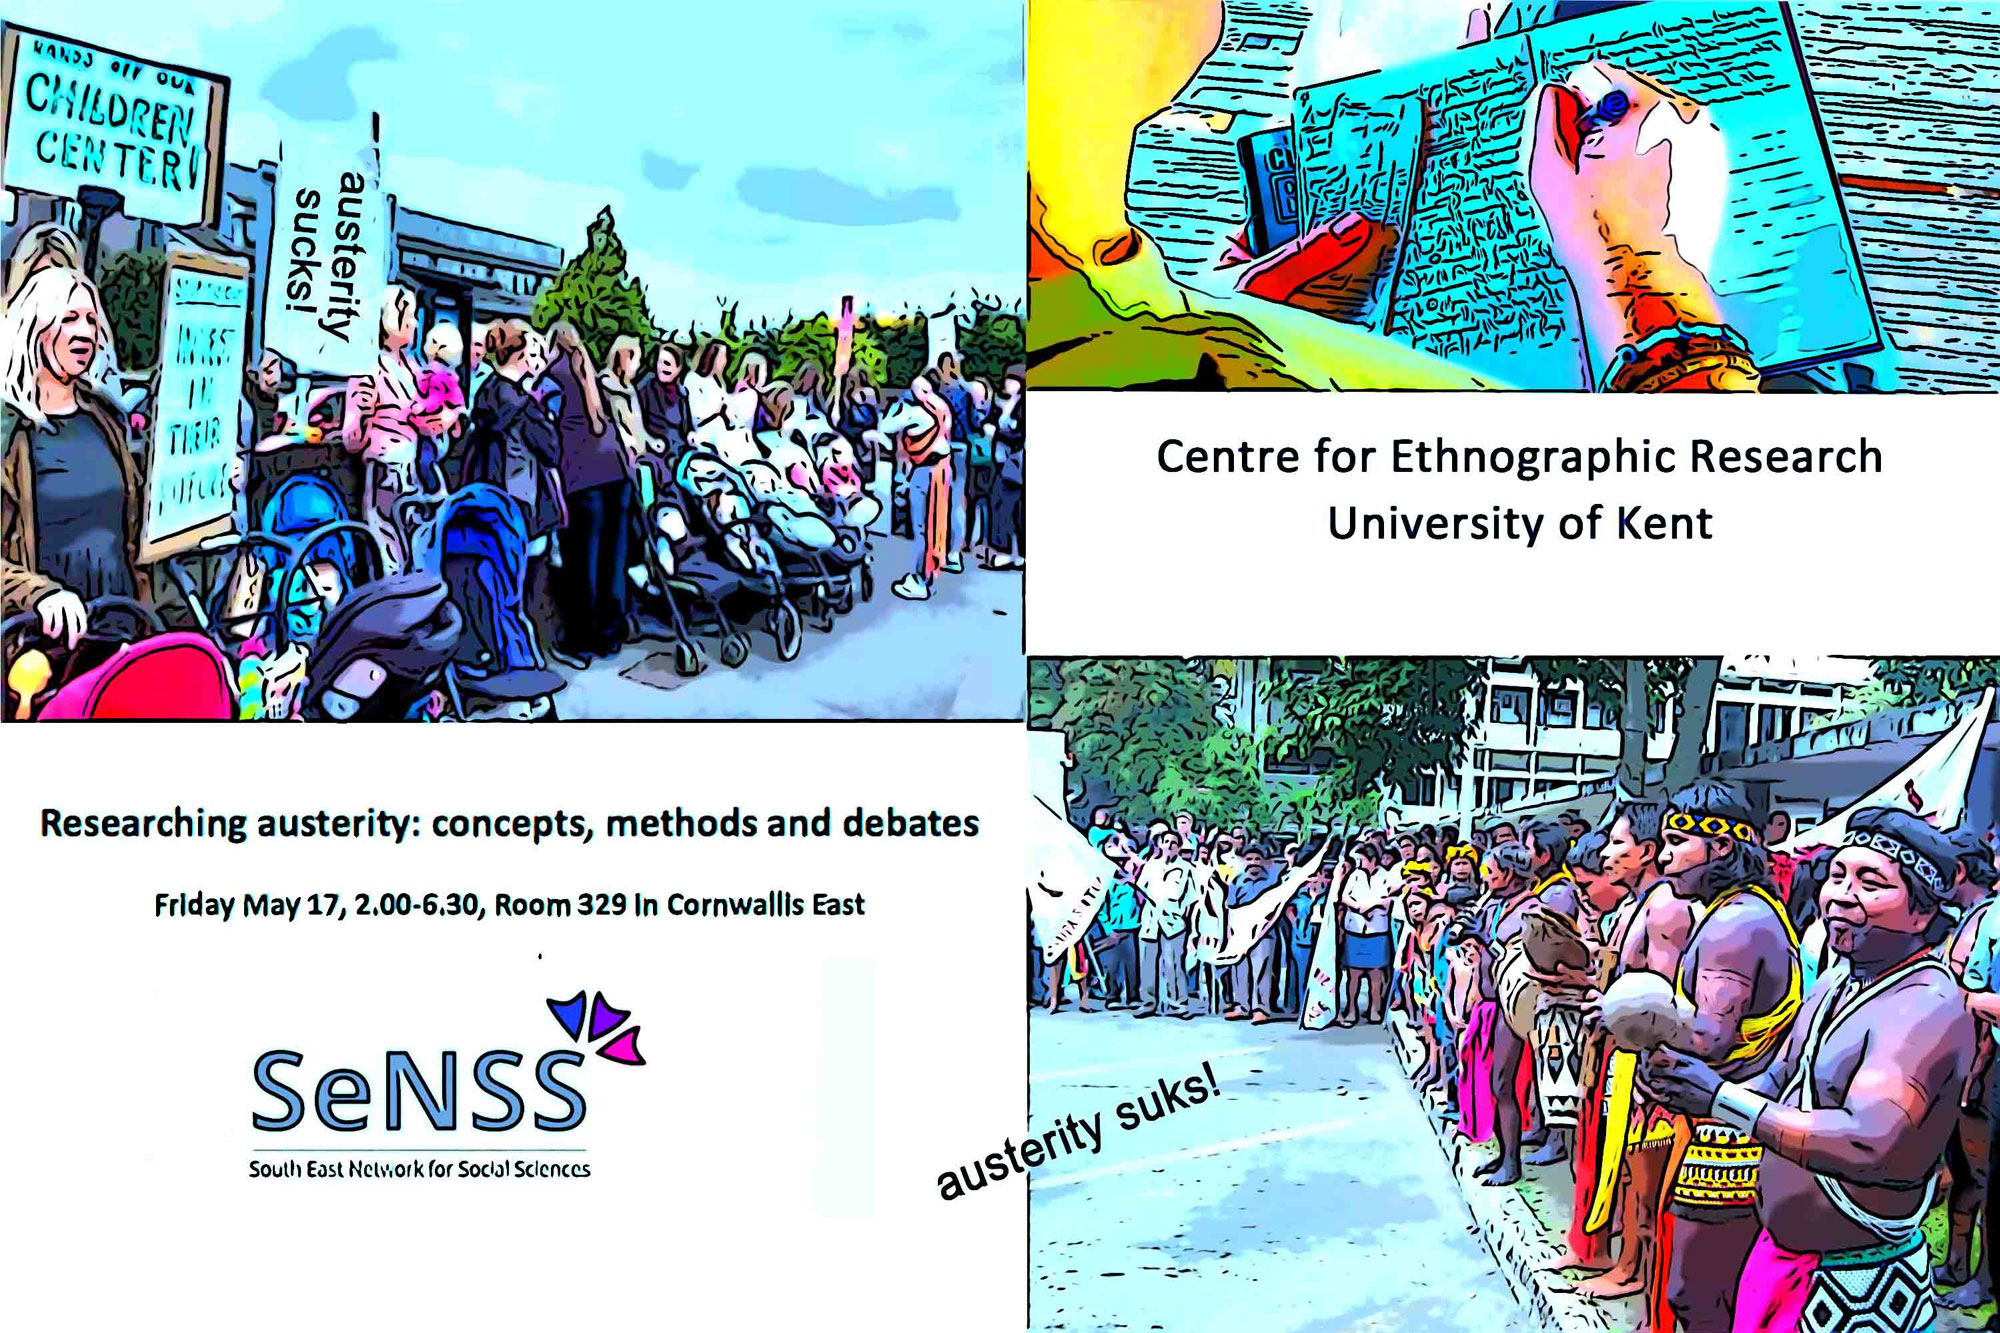 Centre for Ethnographic Research - Researching austerity event